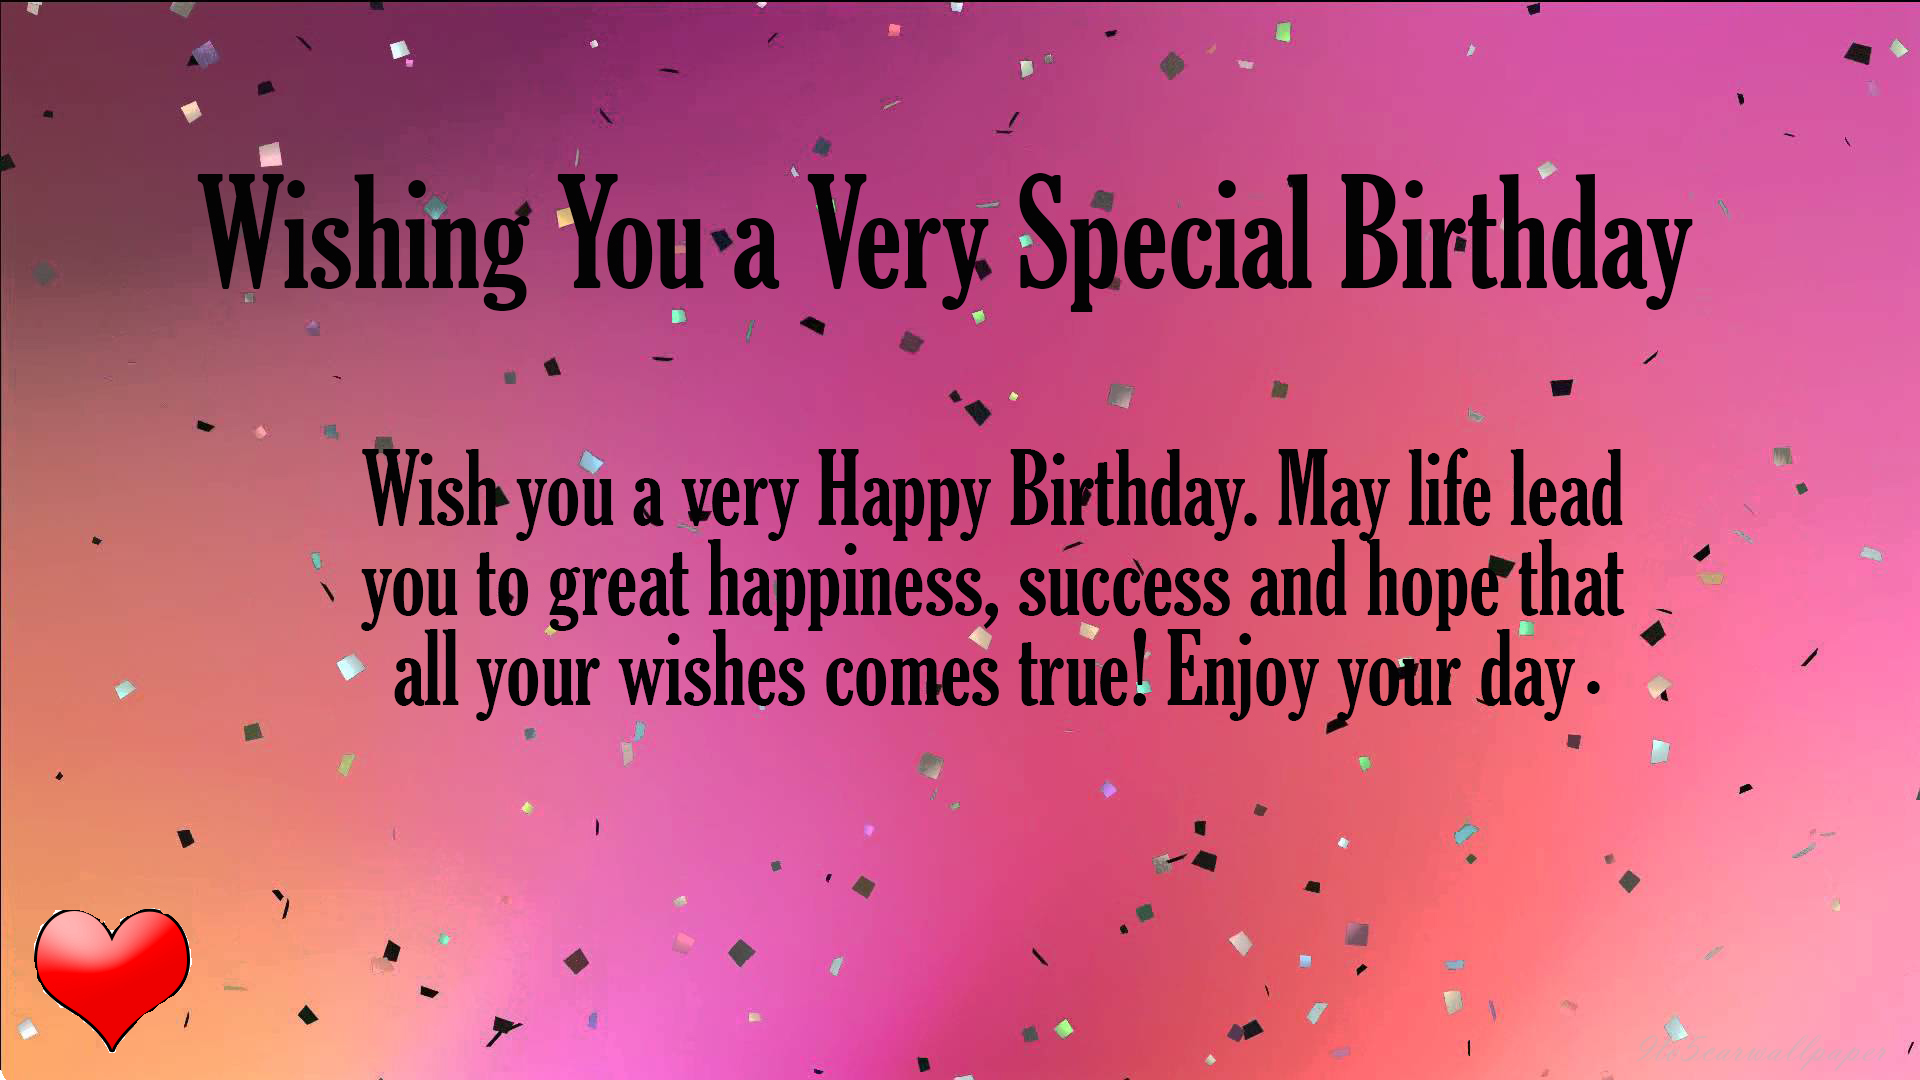 2018-Images-for-Birthday-Wishes-Quotes-Cards-and-Greetings